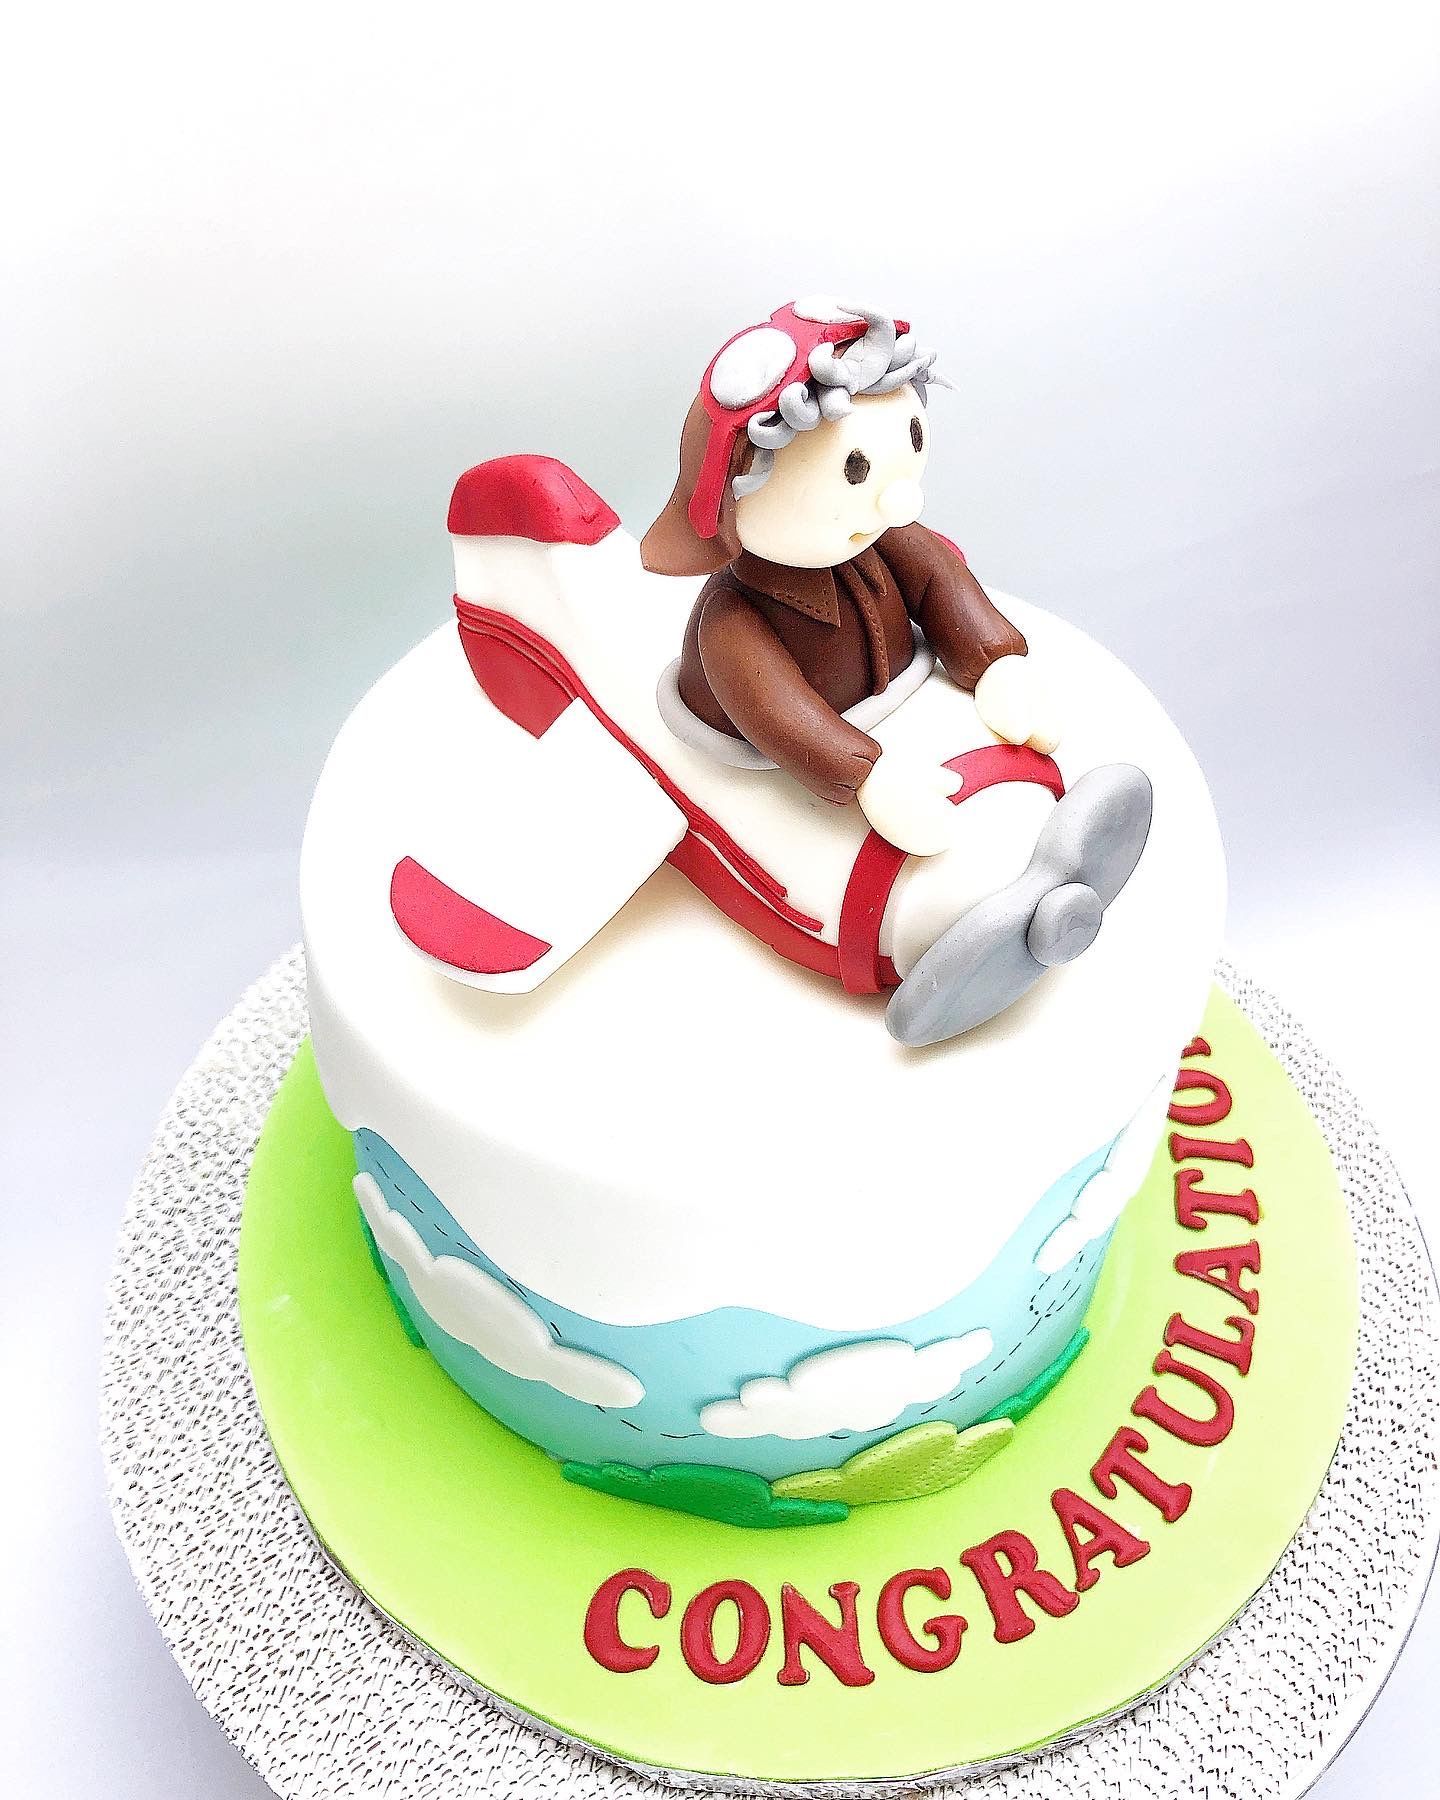 Pilot themed cake with sky, clouds and a fondant plane (with pilot) adorning the cake. The word Congratulations on the cake board.